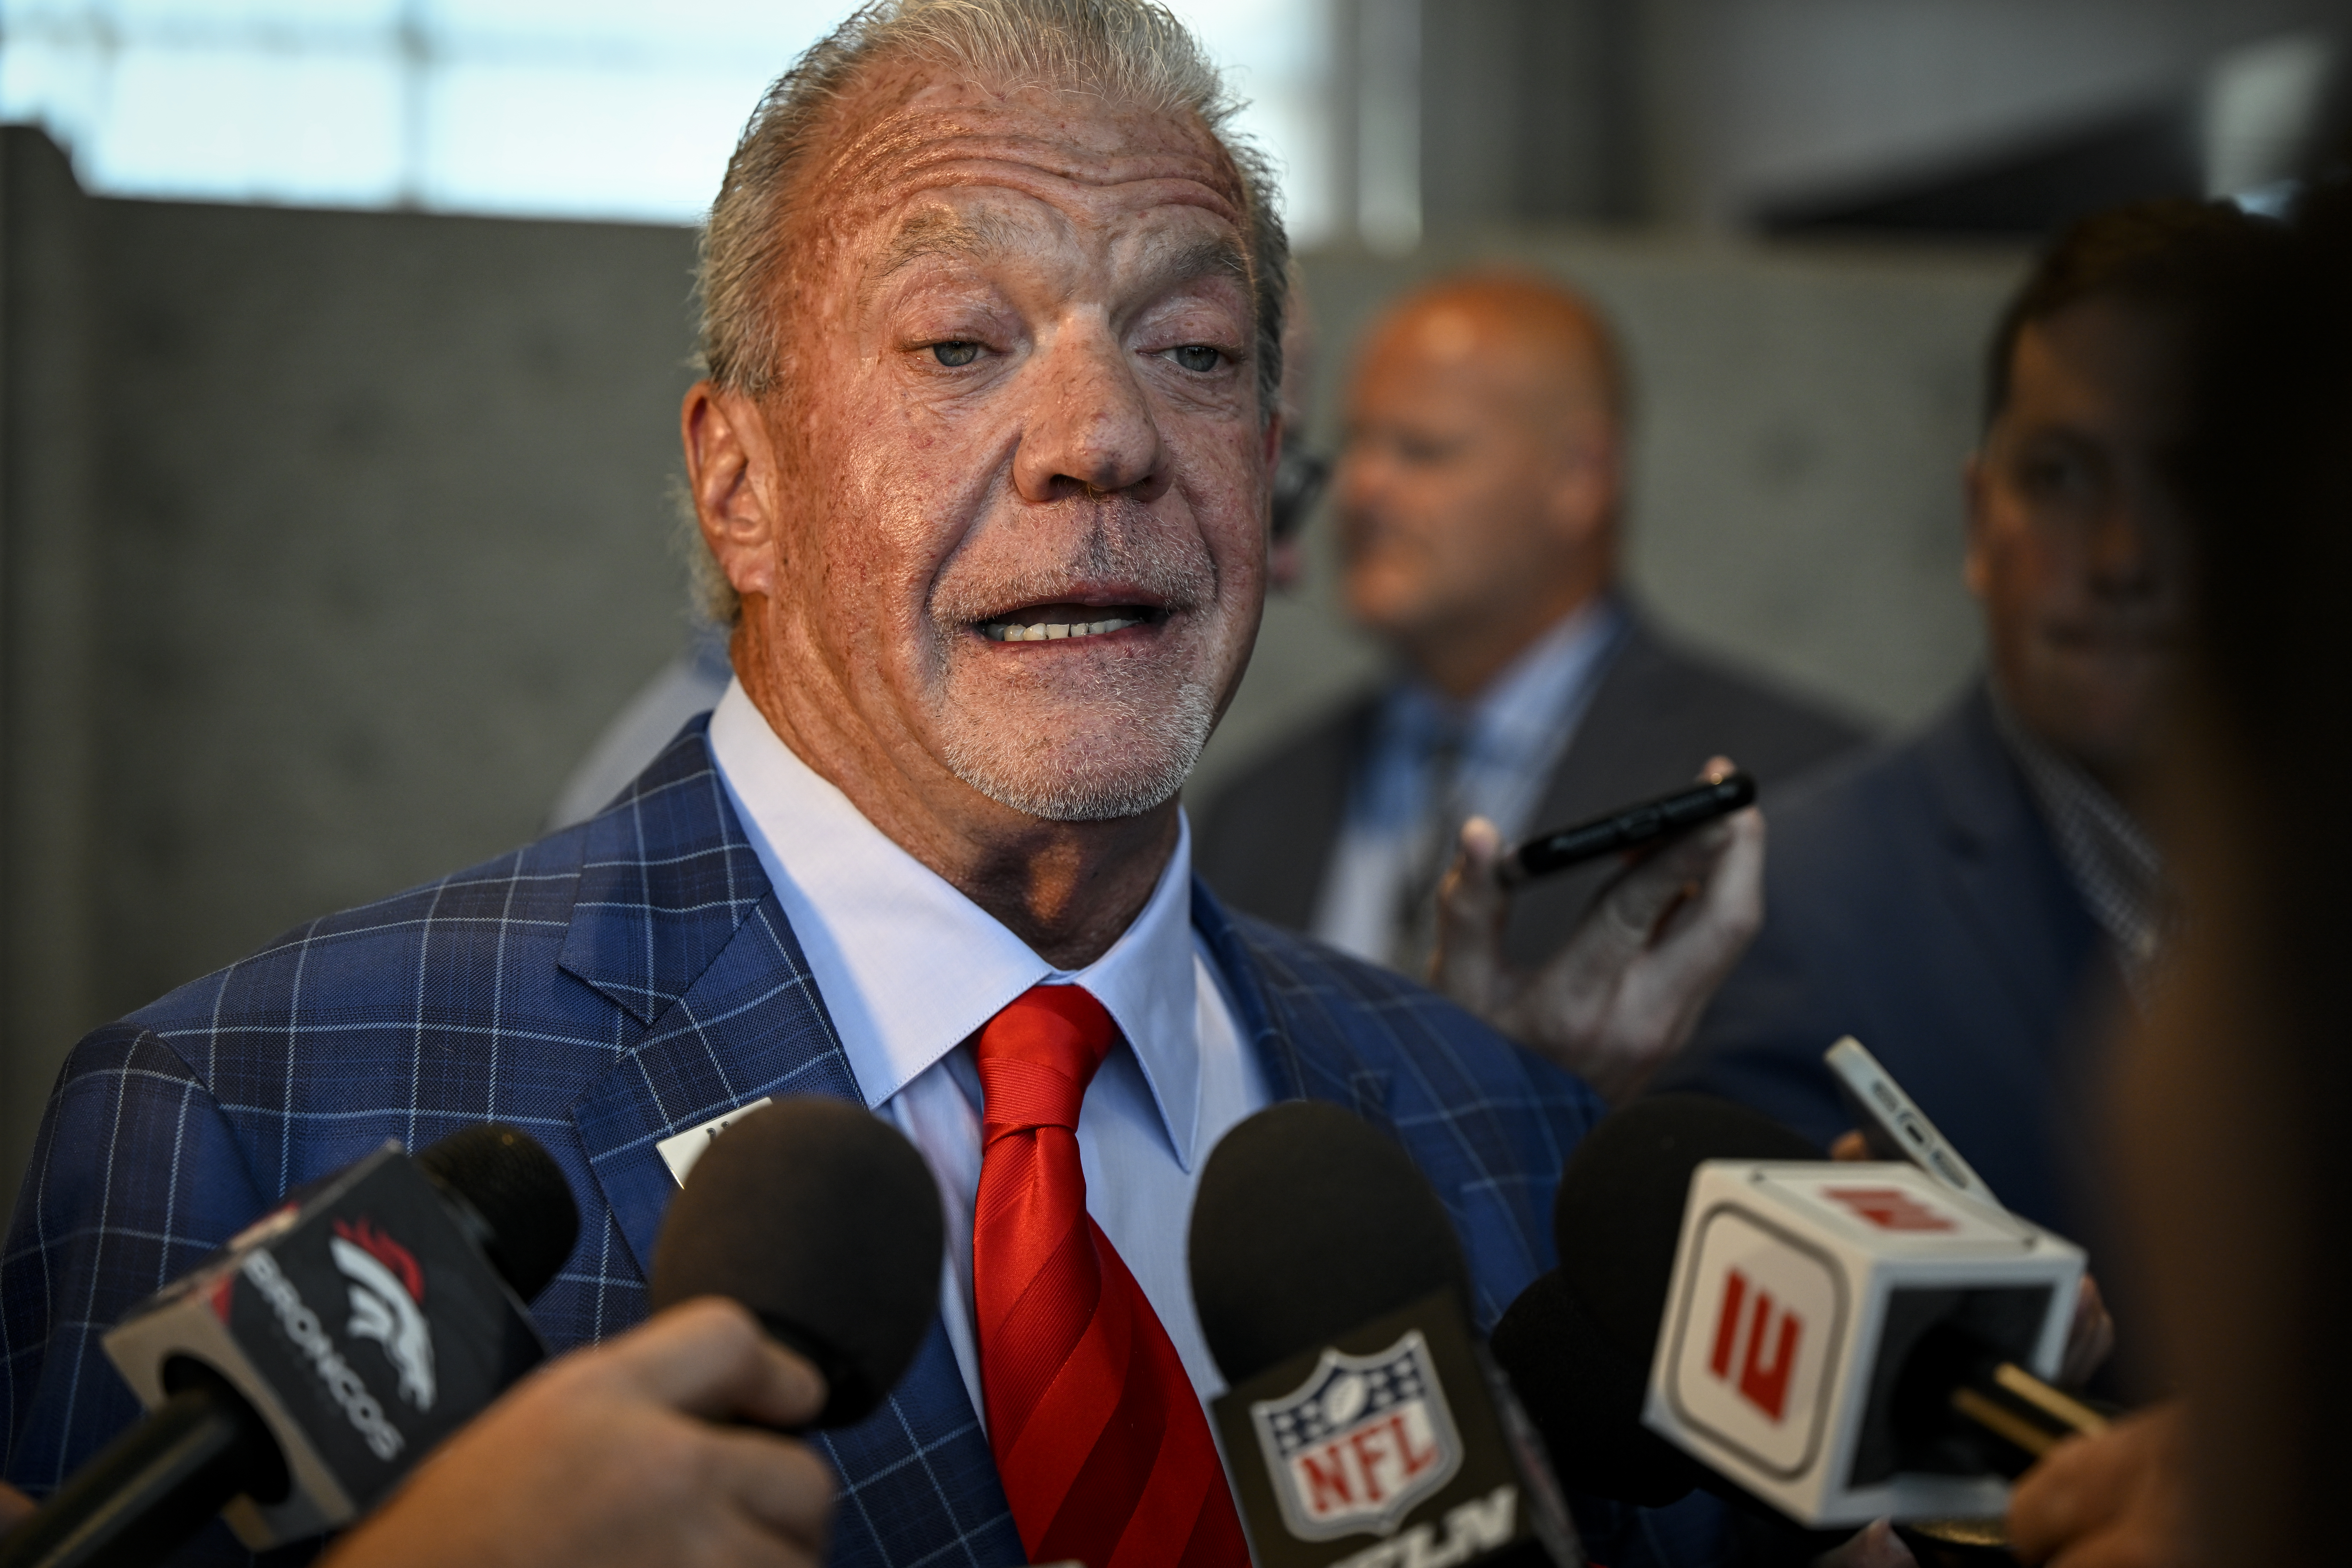 Jim Irsay, owner of the NFL's Indianapolis Colts, speaks to reporters during the league's special meeting at the JW Marriot in Bloomington, Indiana, August 9, 2022. /CFP